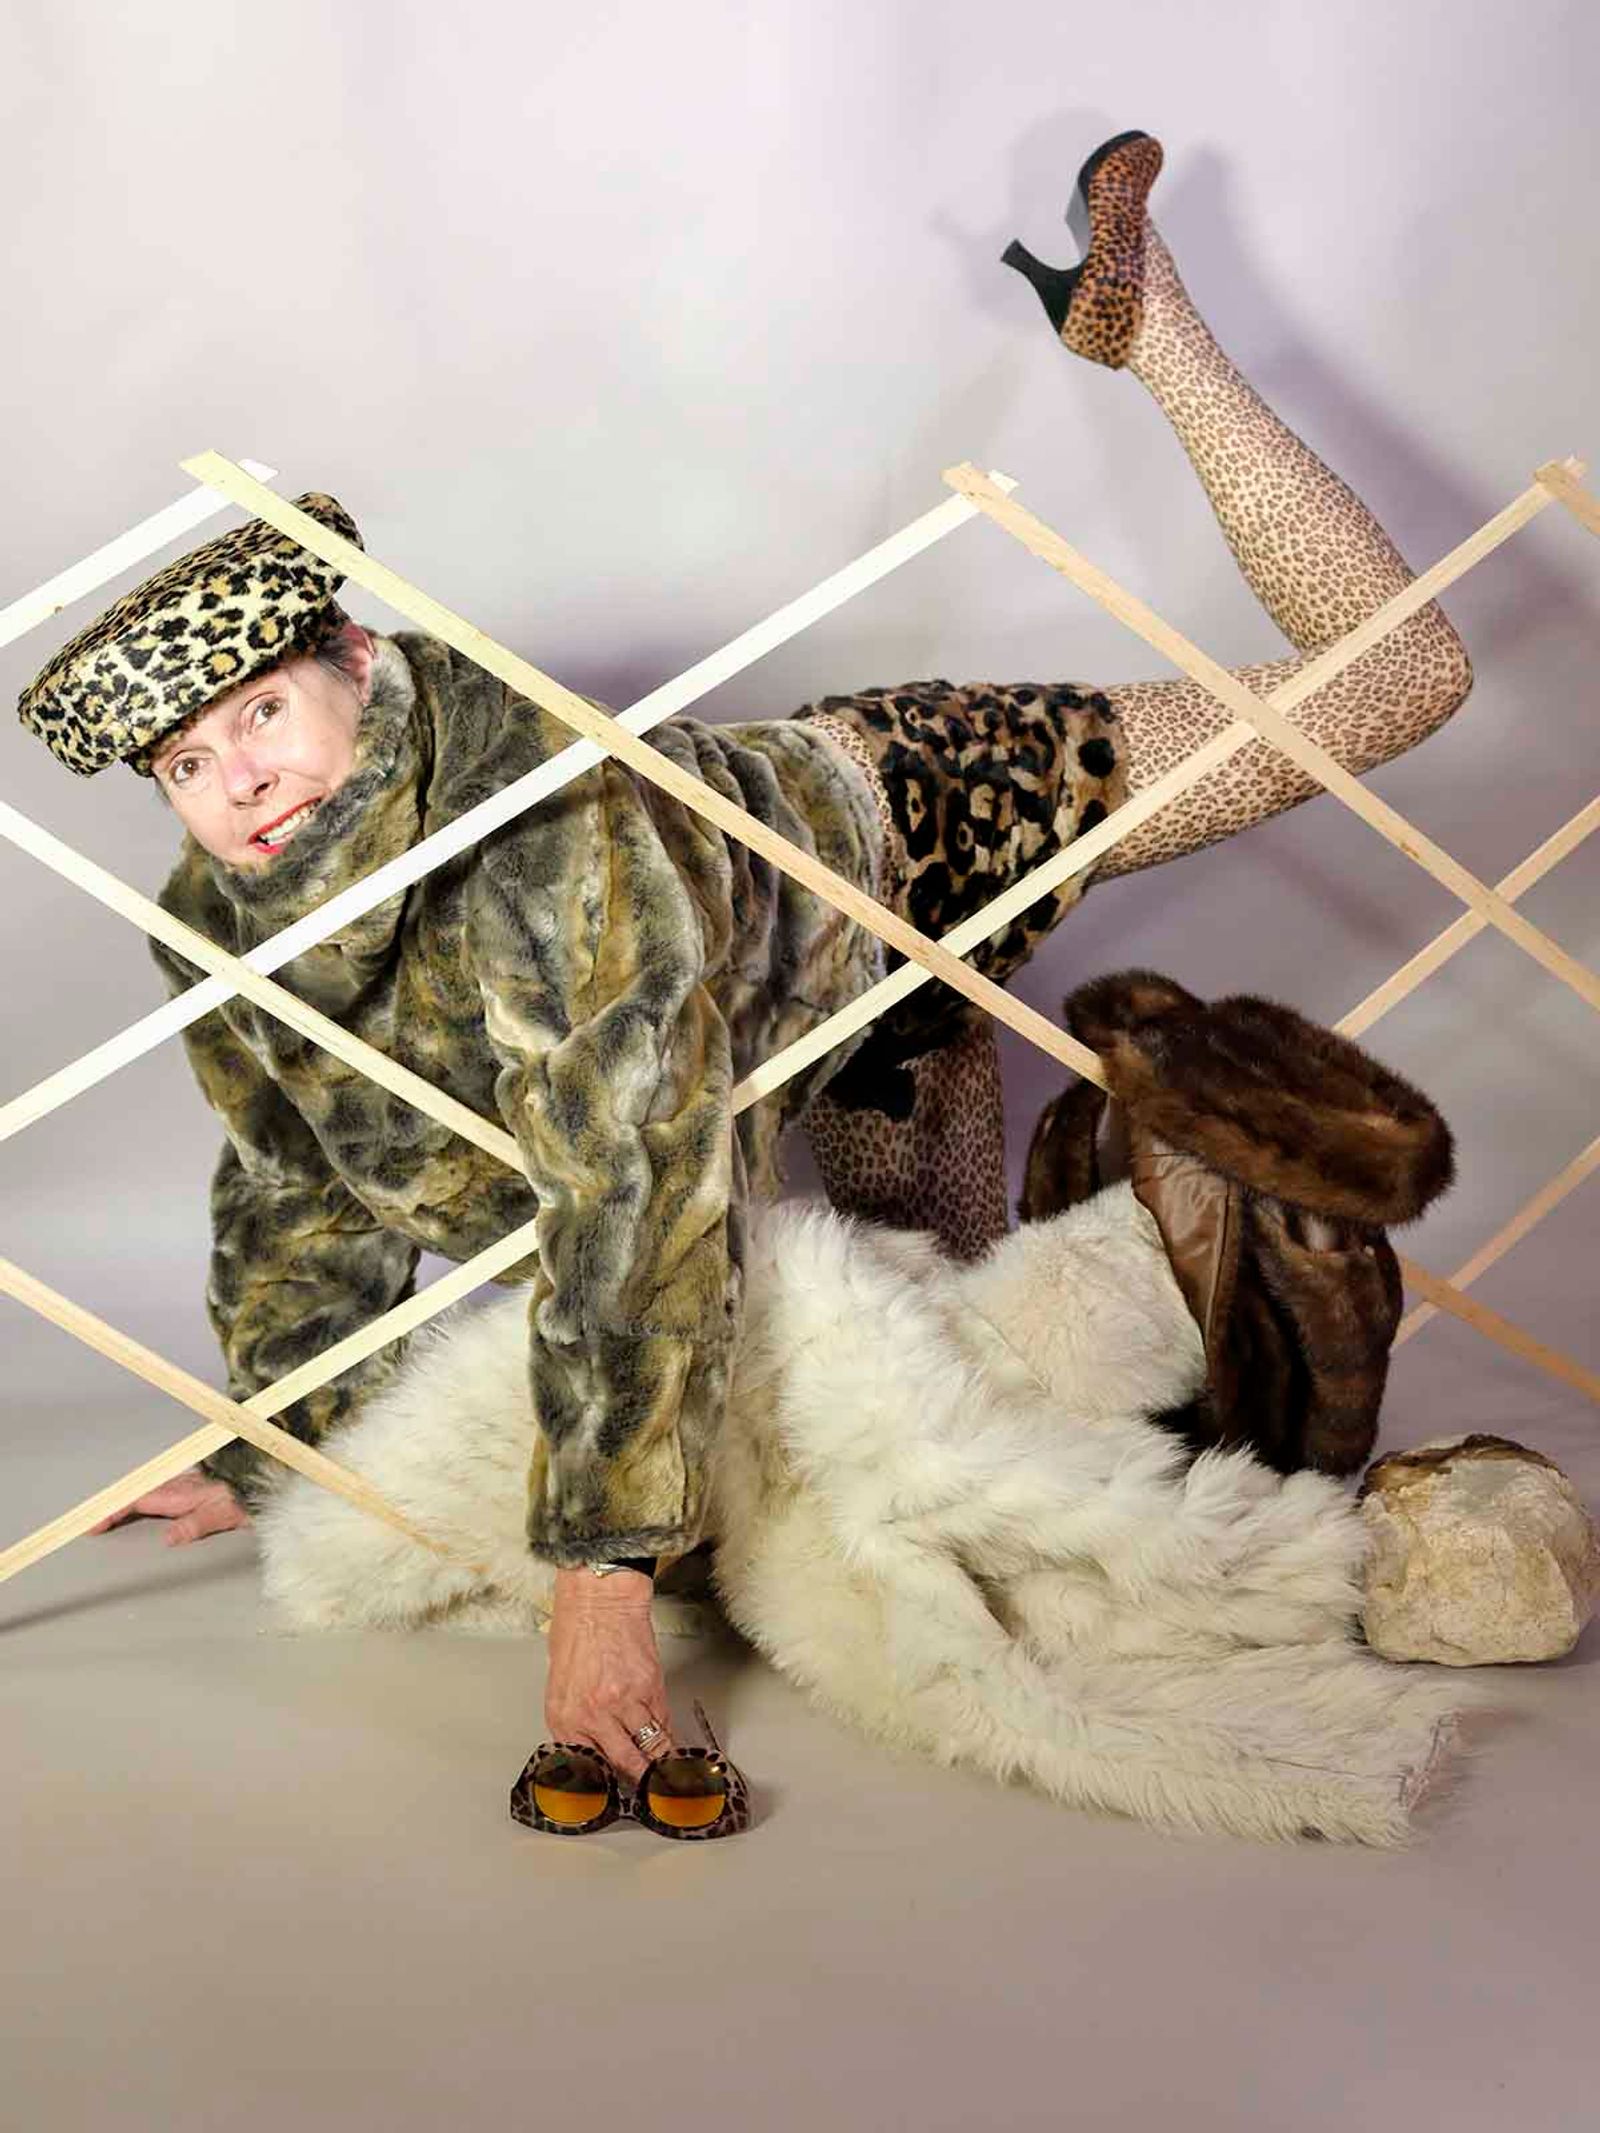 © Yvonne Steiger - Image from the Phtostory Women Wood and Fur photography project